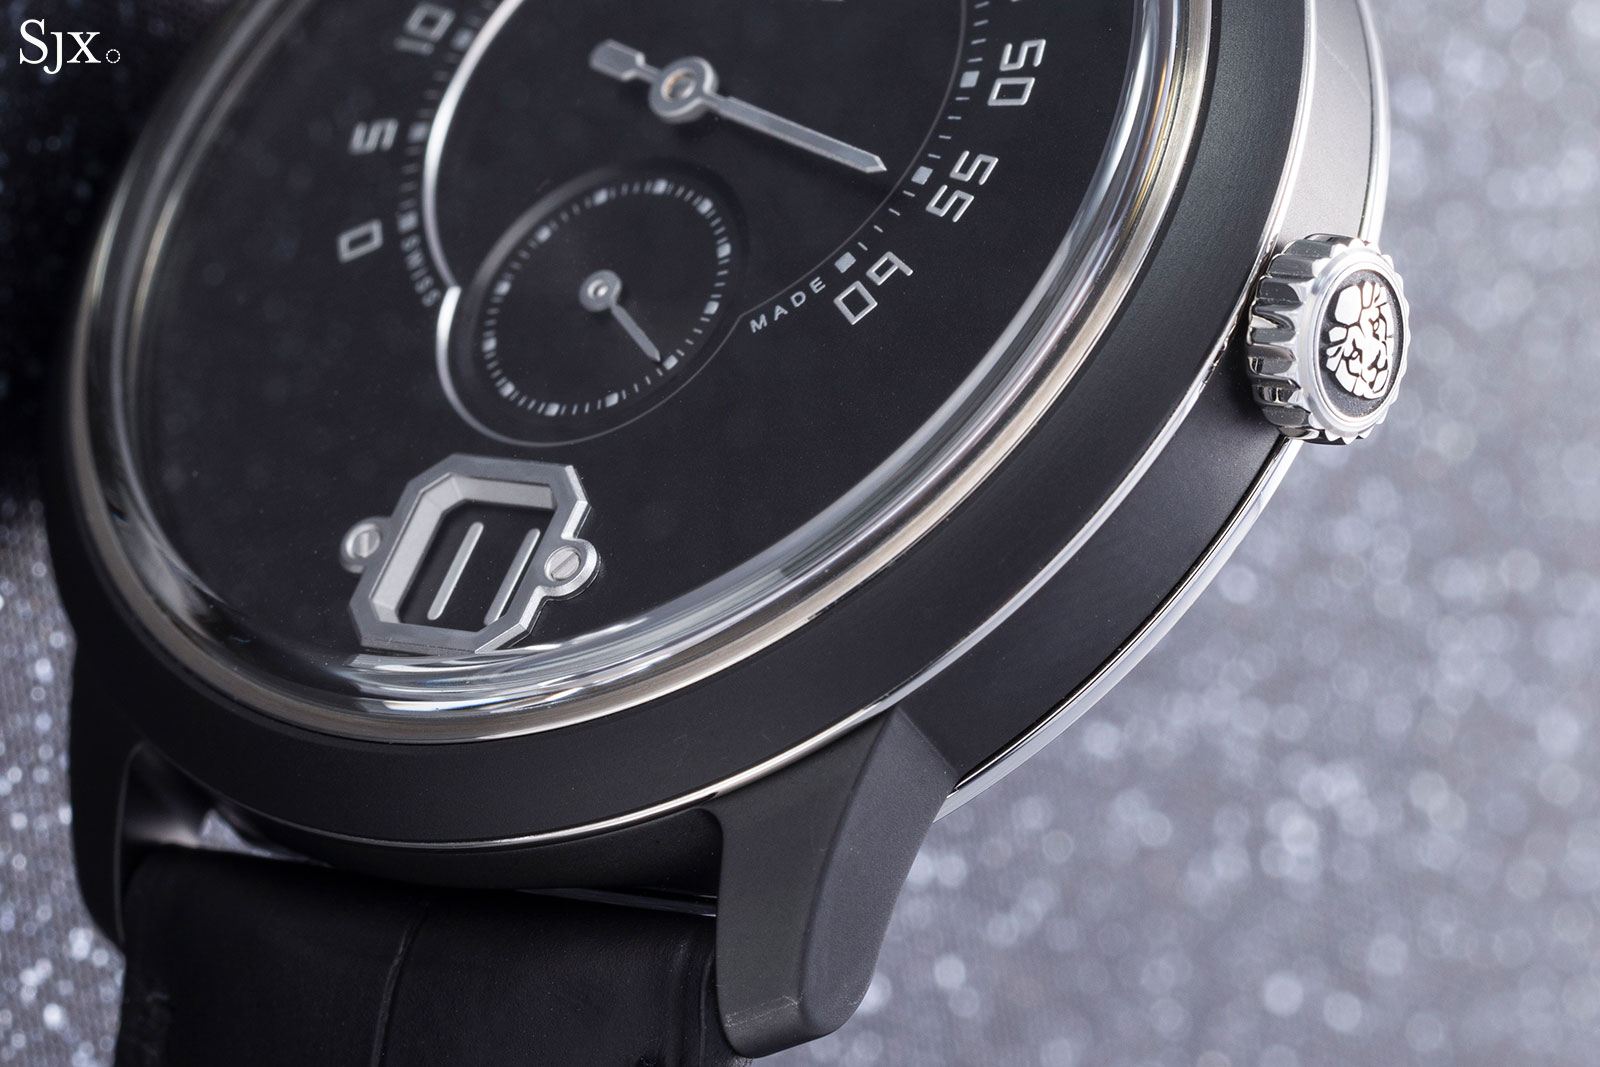 Chanel Monsieur Watch With First In-House Movement Hands-On